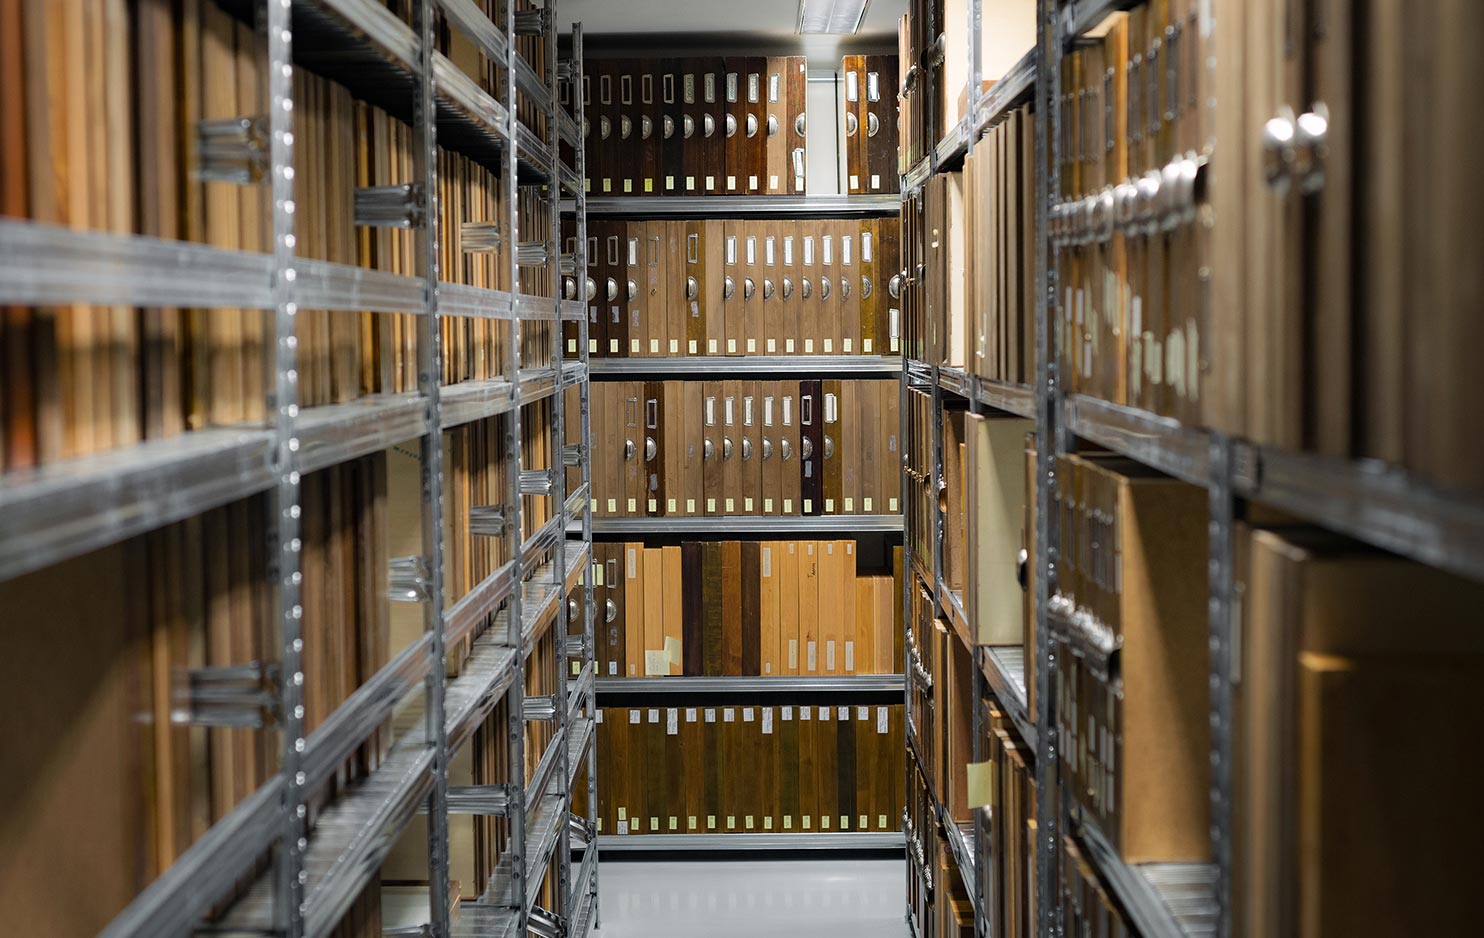 Documents are stored in a storage unit.